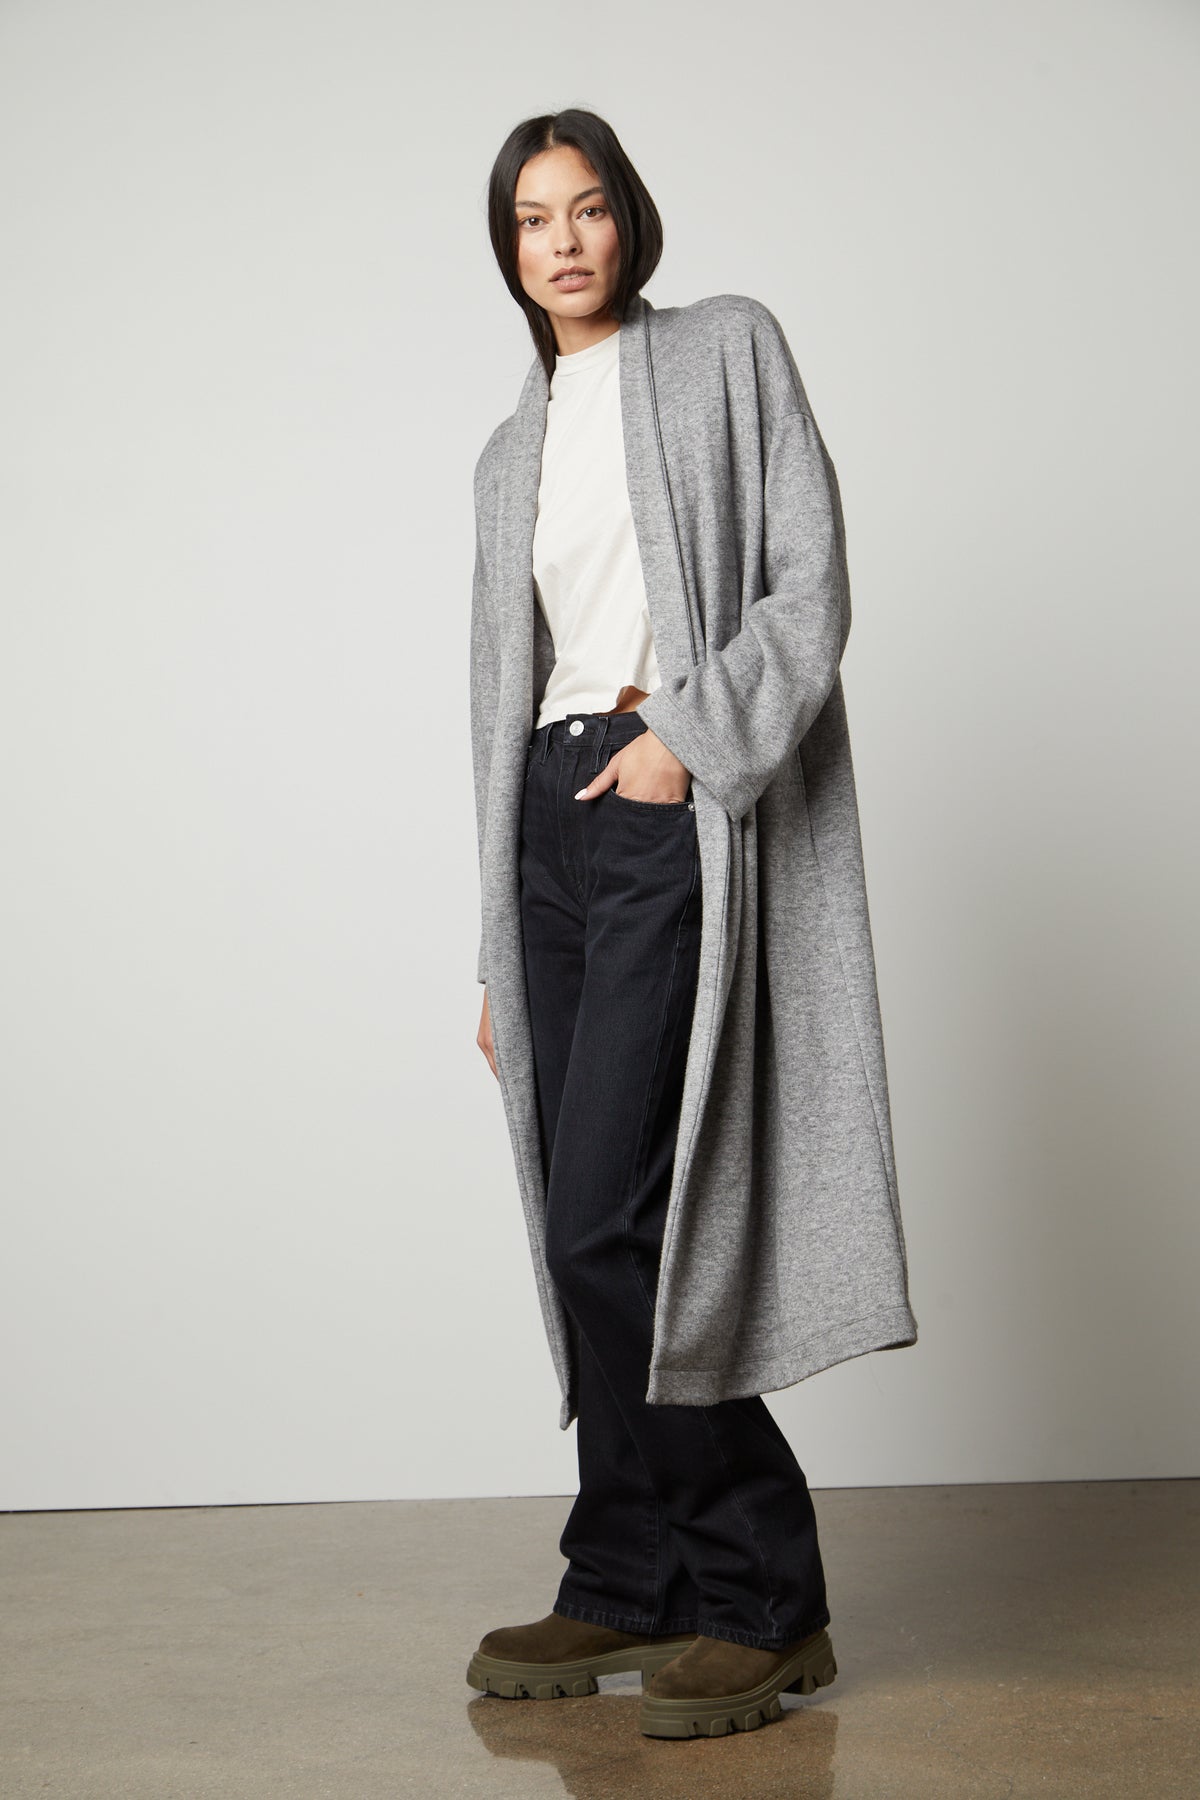 The model is wearing a Velvet by Graham & Spencer PATRICIA DOUBLE KNIT DUSTER CARDIGAN and jeans.-26910331699393